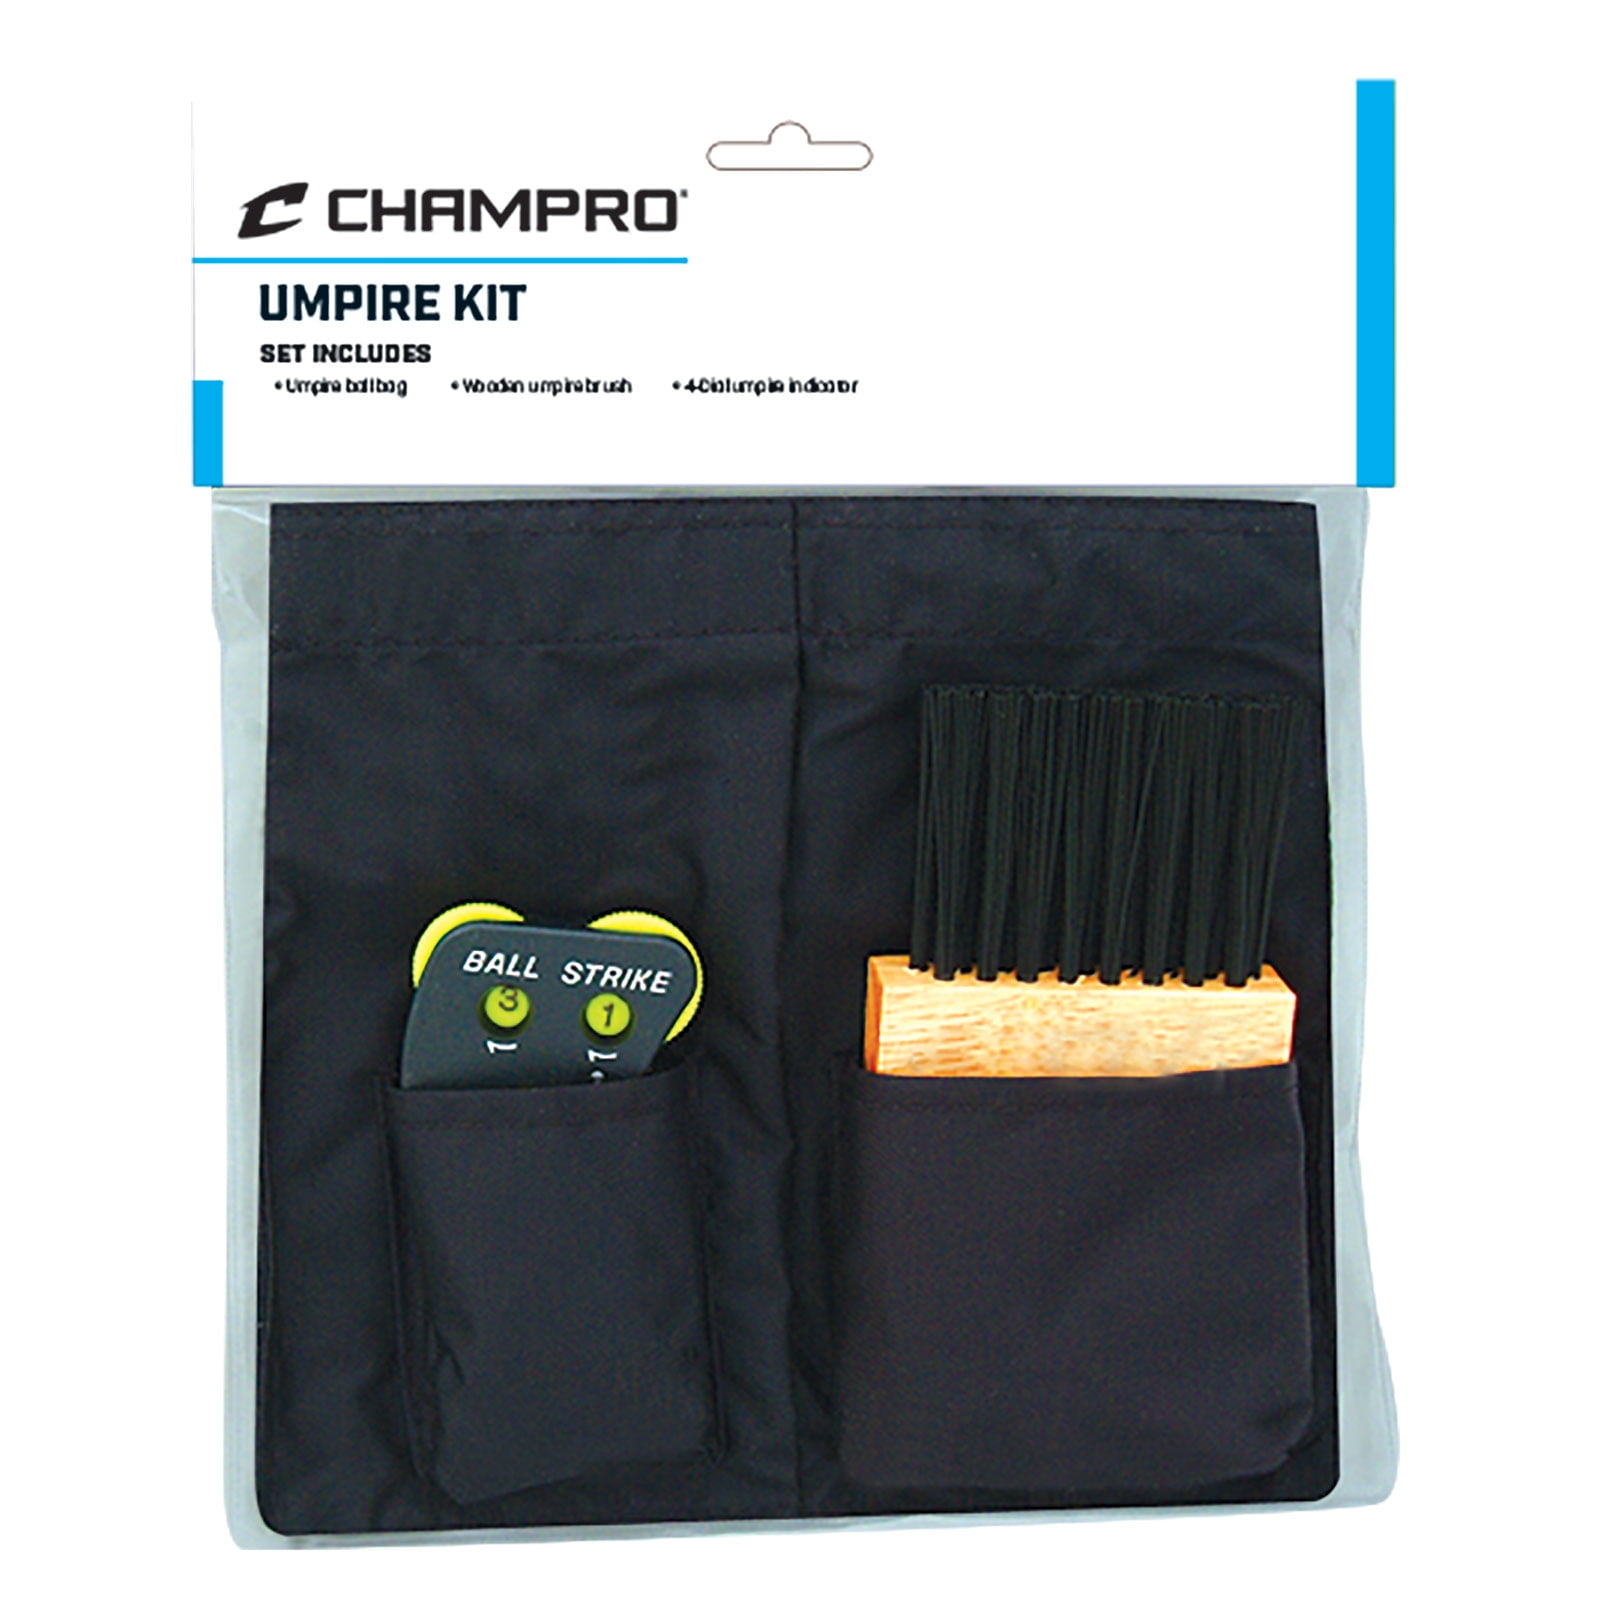 Details about   Softball Baseball Equipment Gear Bag Coaches Umpires Players Storage Chevrolet 